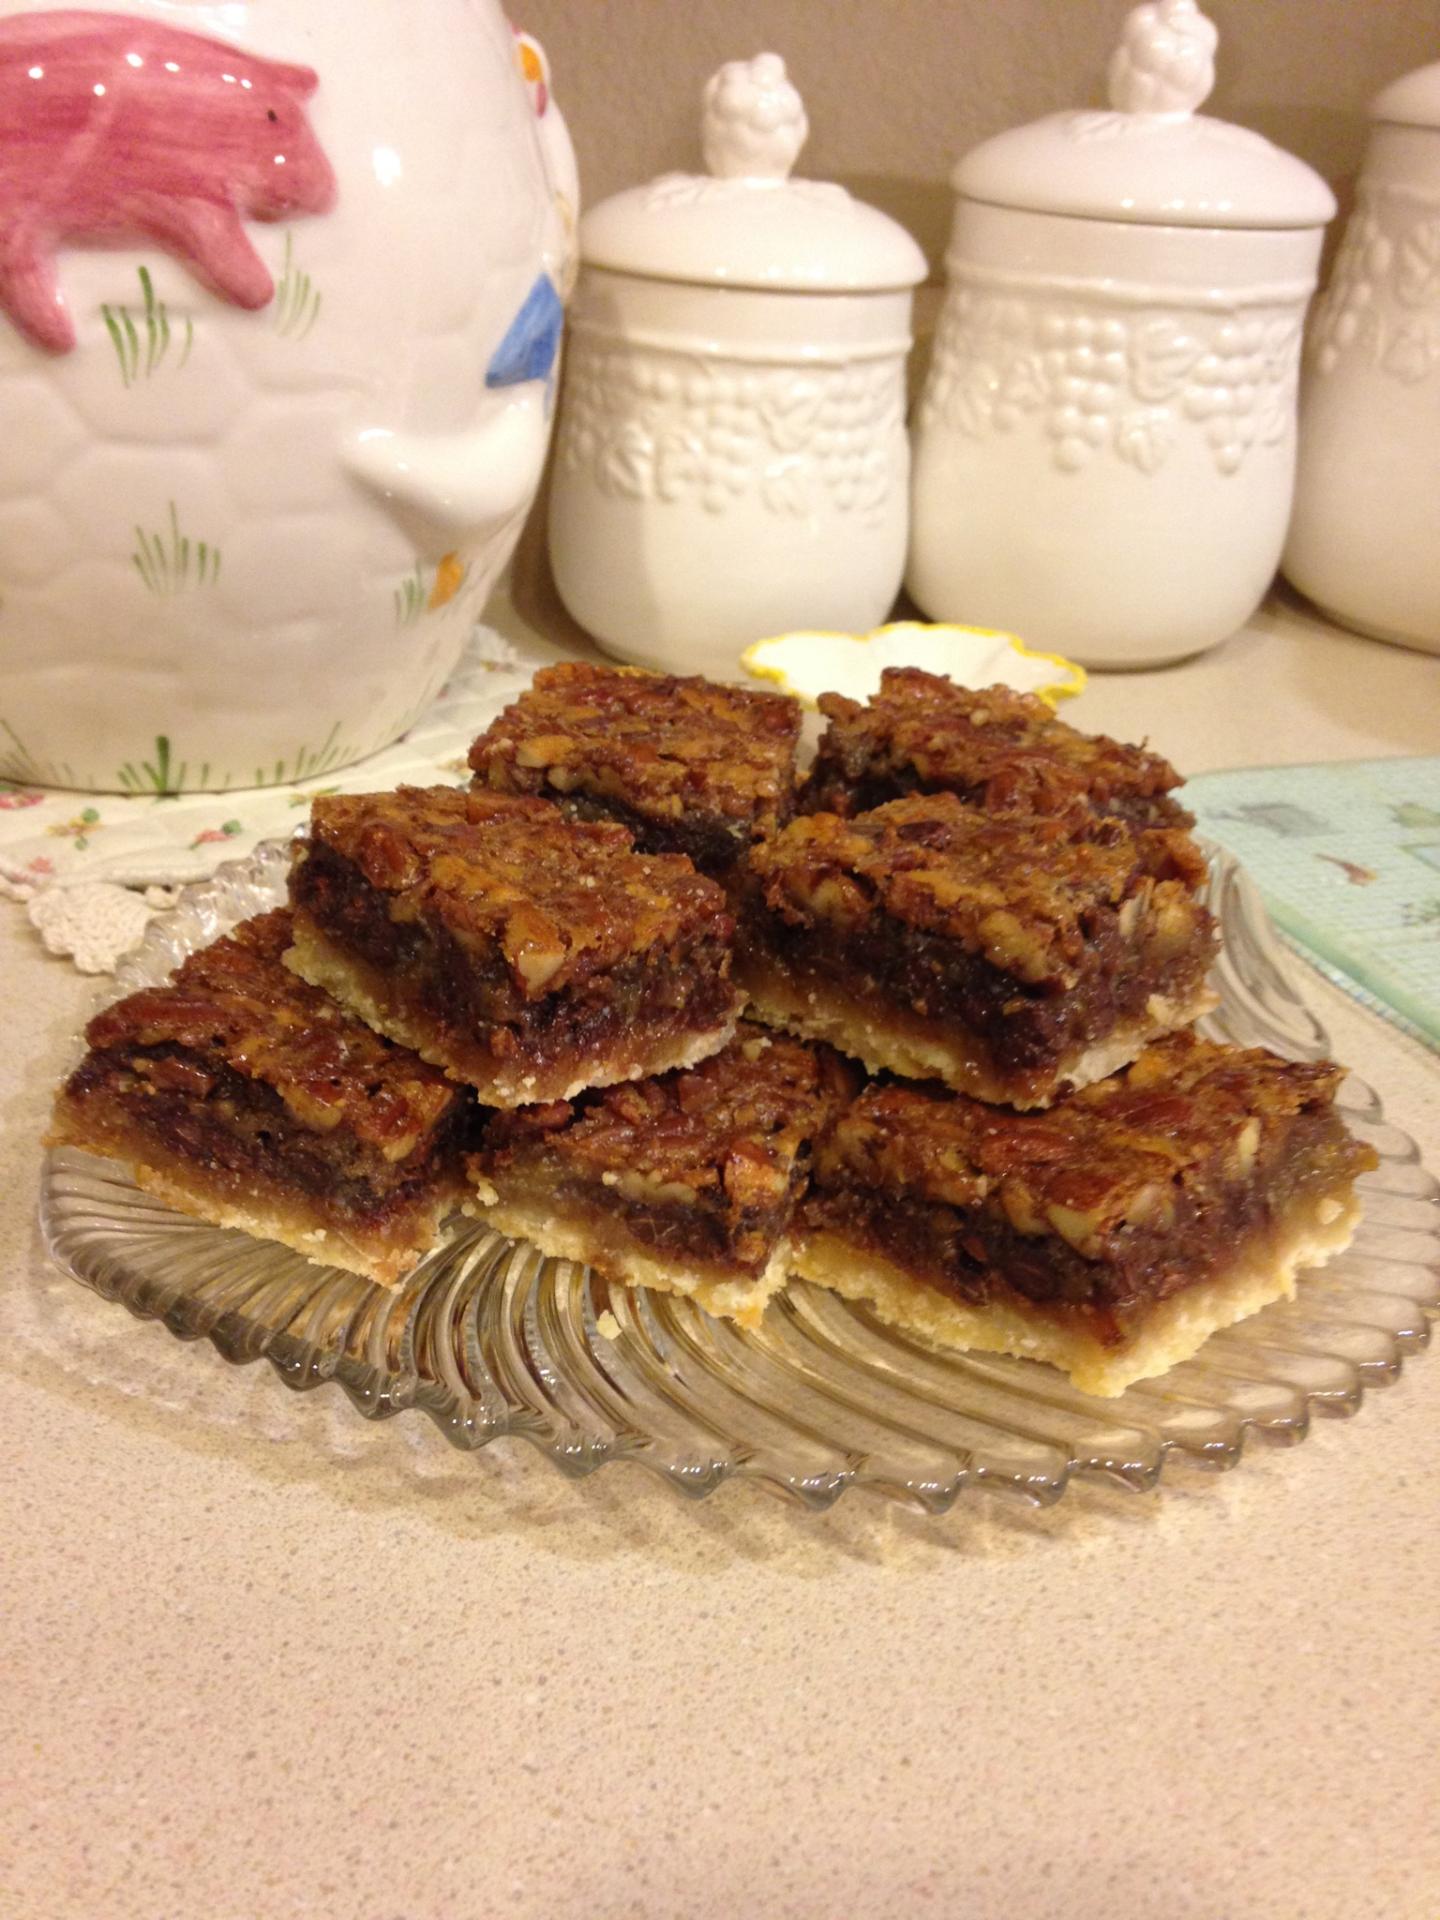 It’s Bourbon Appreciation Month! A great time to post a recipe share
with my Aunt B! Bourbon Pecan Bars…yum huh!